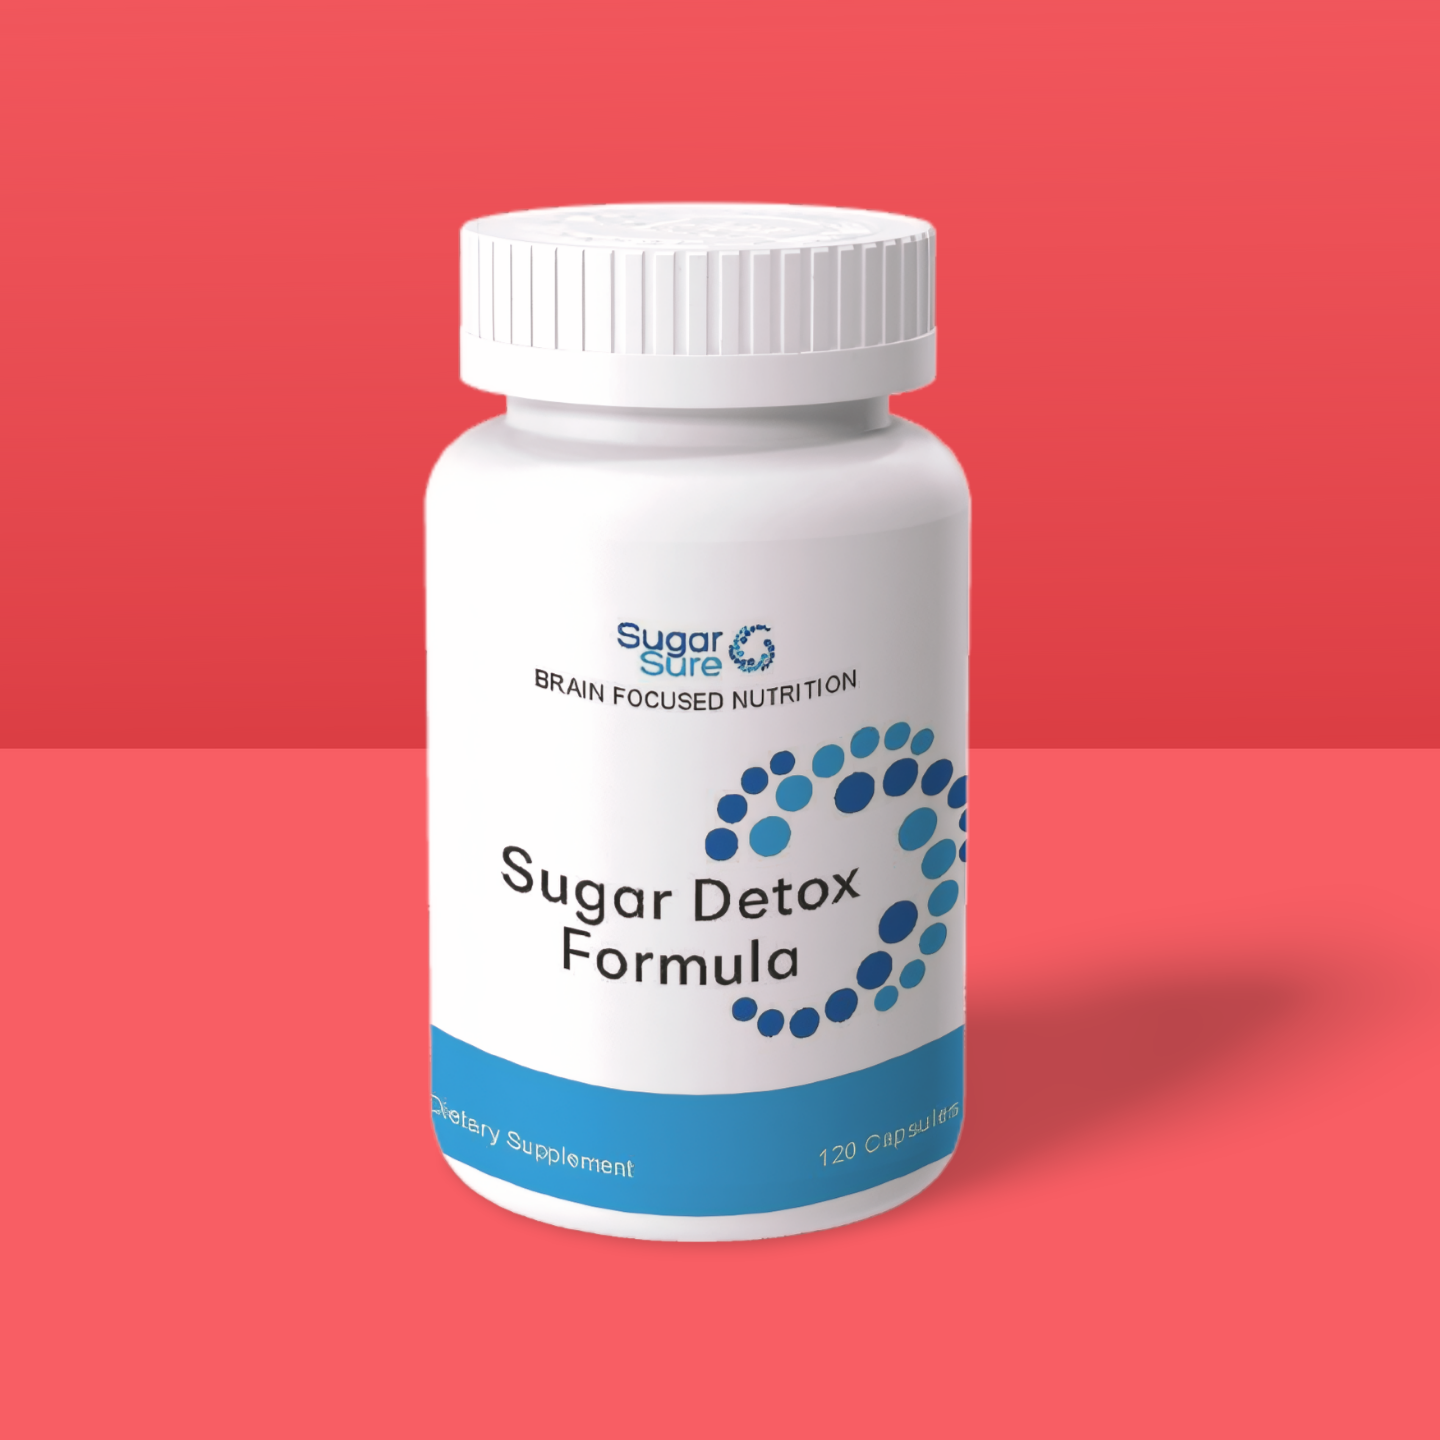 Sugar Detox Formula by Sugar Sure Reviews: Attention! Primary Things To Reflect Upon Before Buying